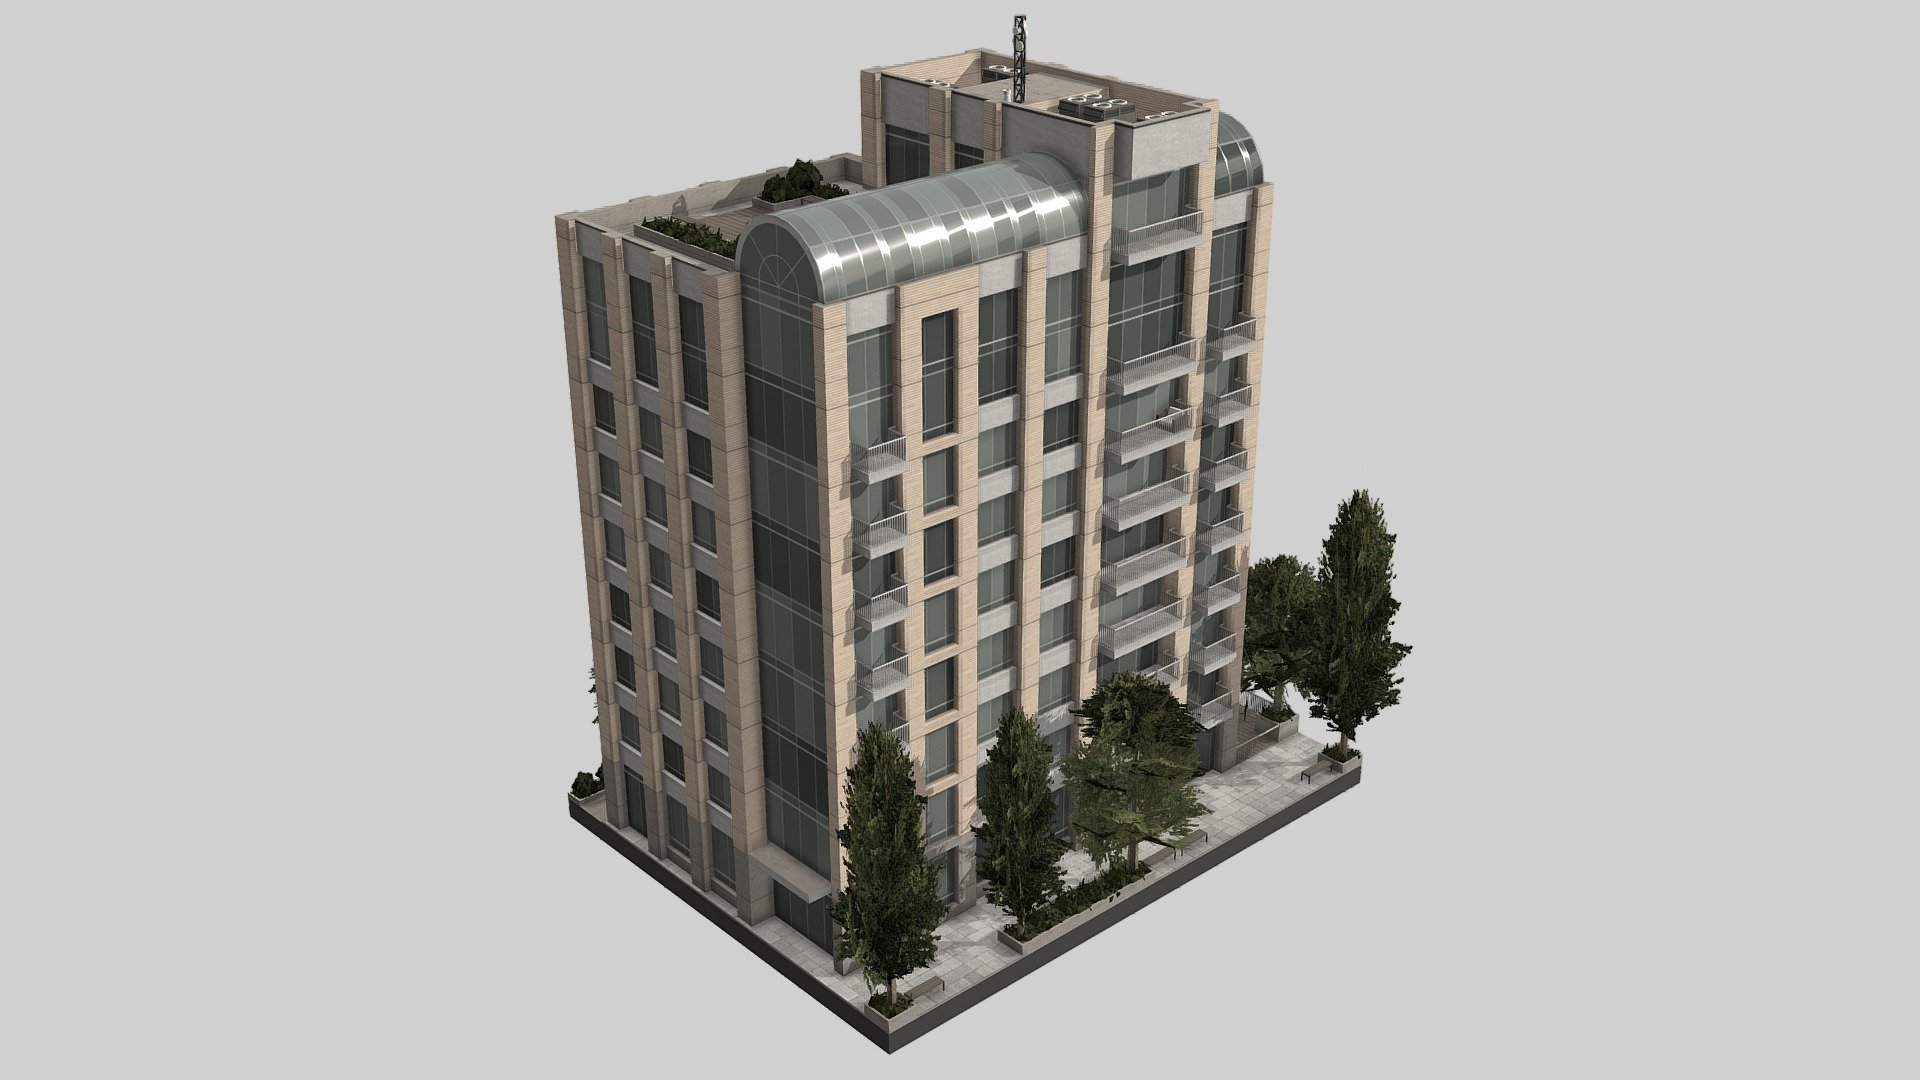 Cities Skylines 
j.p - regular collection 

Residential Building model by jorge.puerta

Lily Park - Residences on Steam

j.p - regular collection on Steam

Support me on Patreon - Lily Park - Residences (Cities Skylines Assets) - Buy Royalty Free 3D model by jorgepuerta 3d model